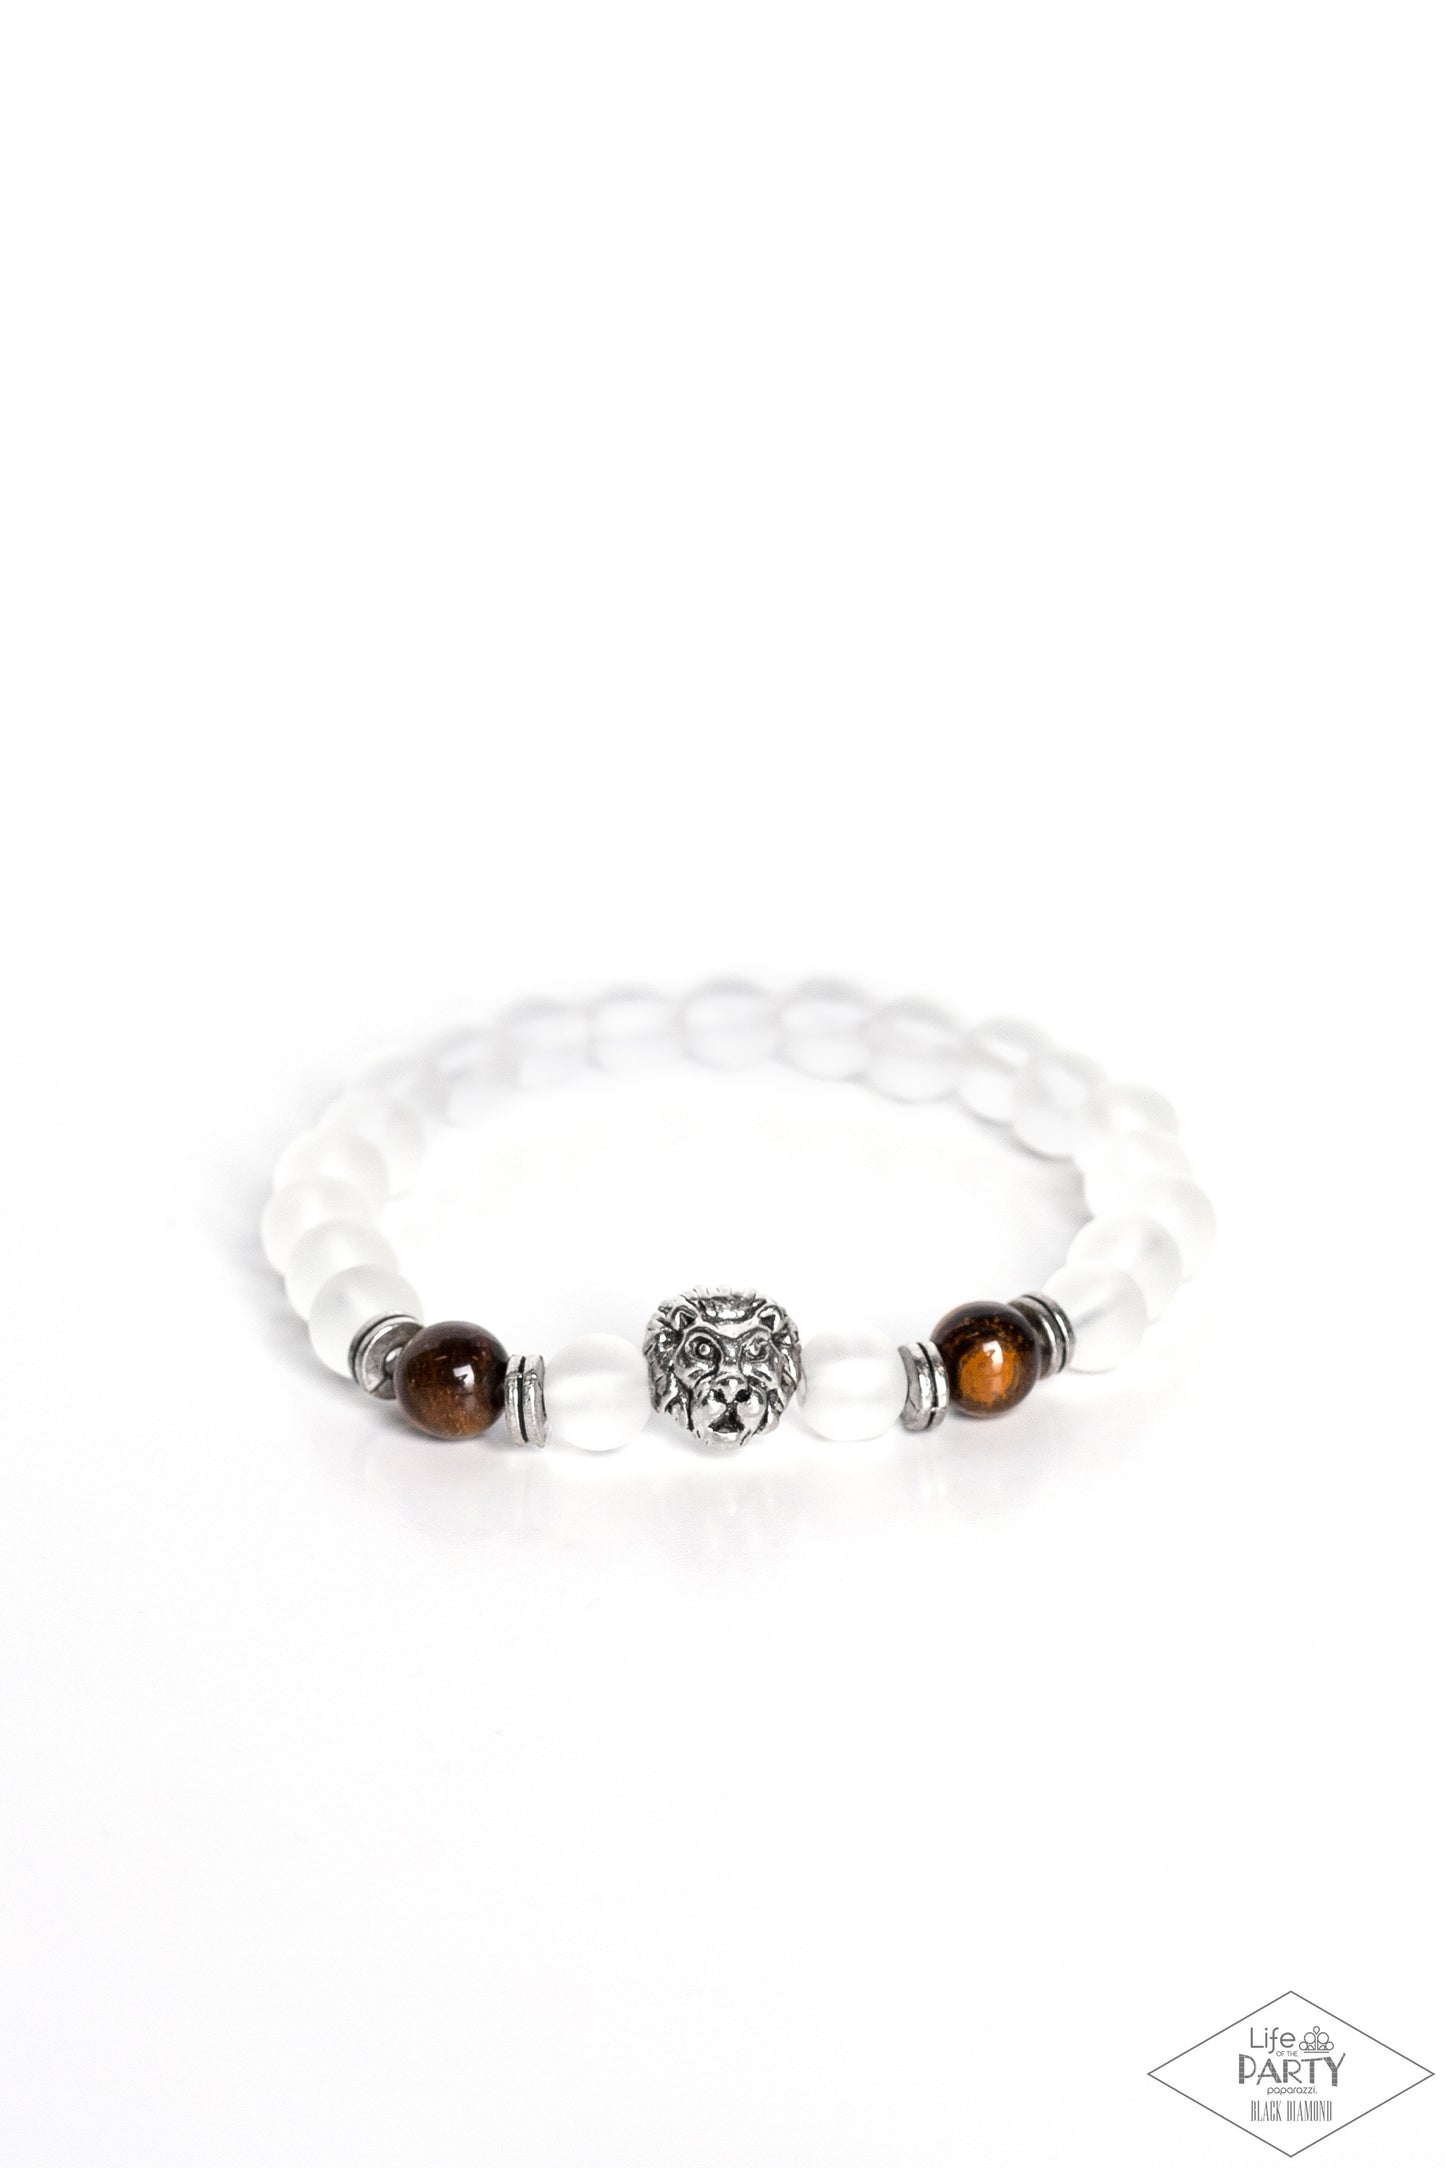 Cute Bracelets - The Lions Share - Brown Bracelet - Life of the Party Paparazzi jewelry image